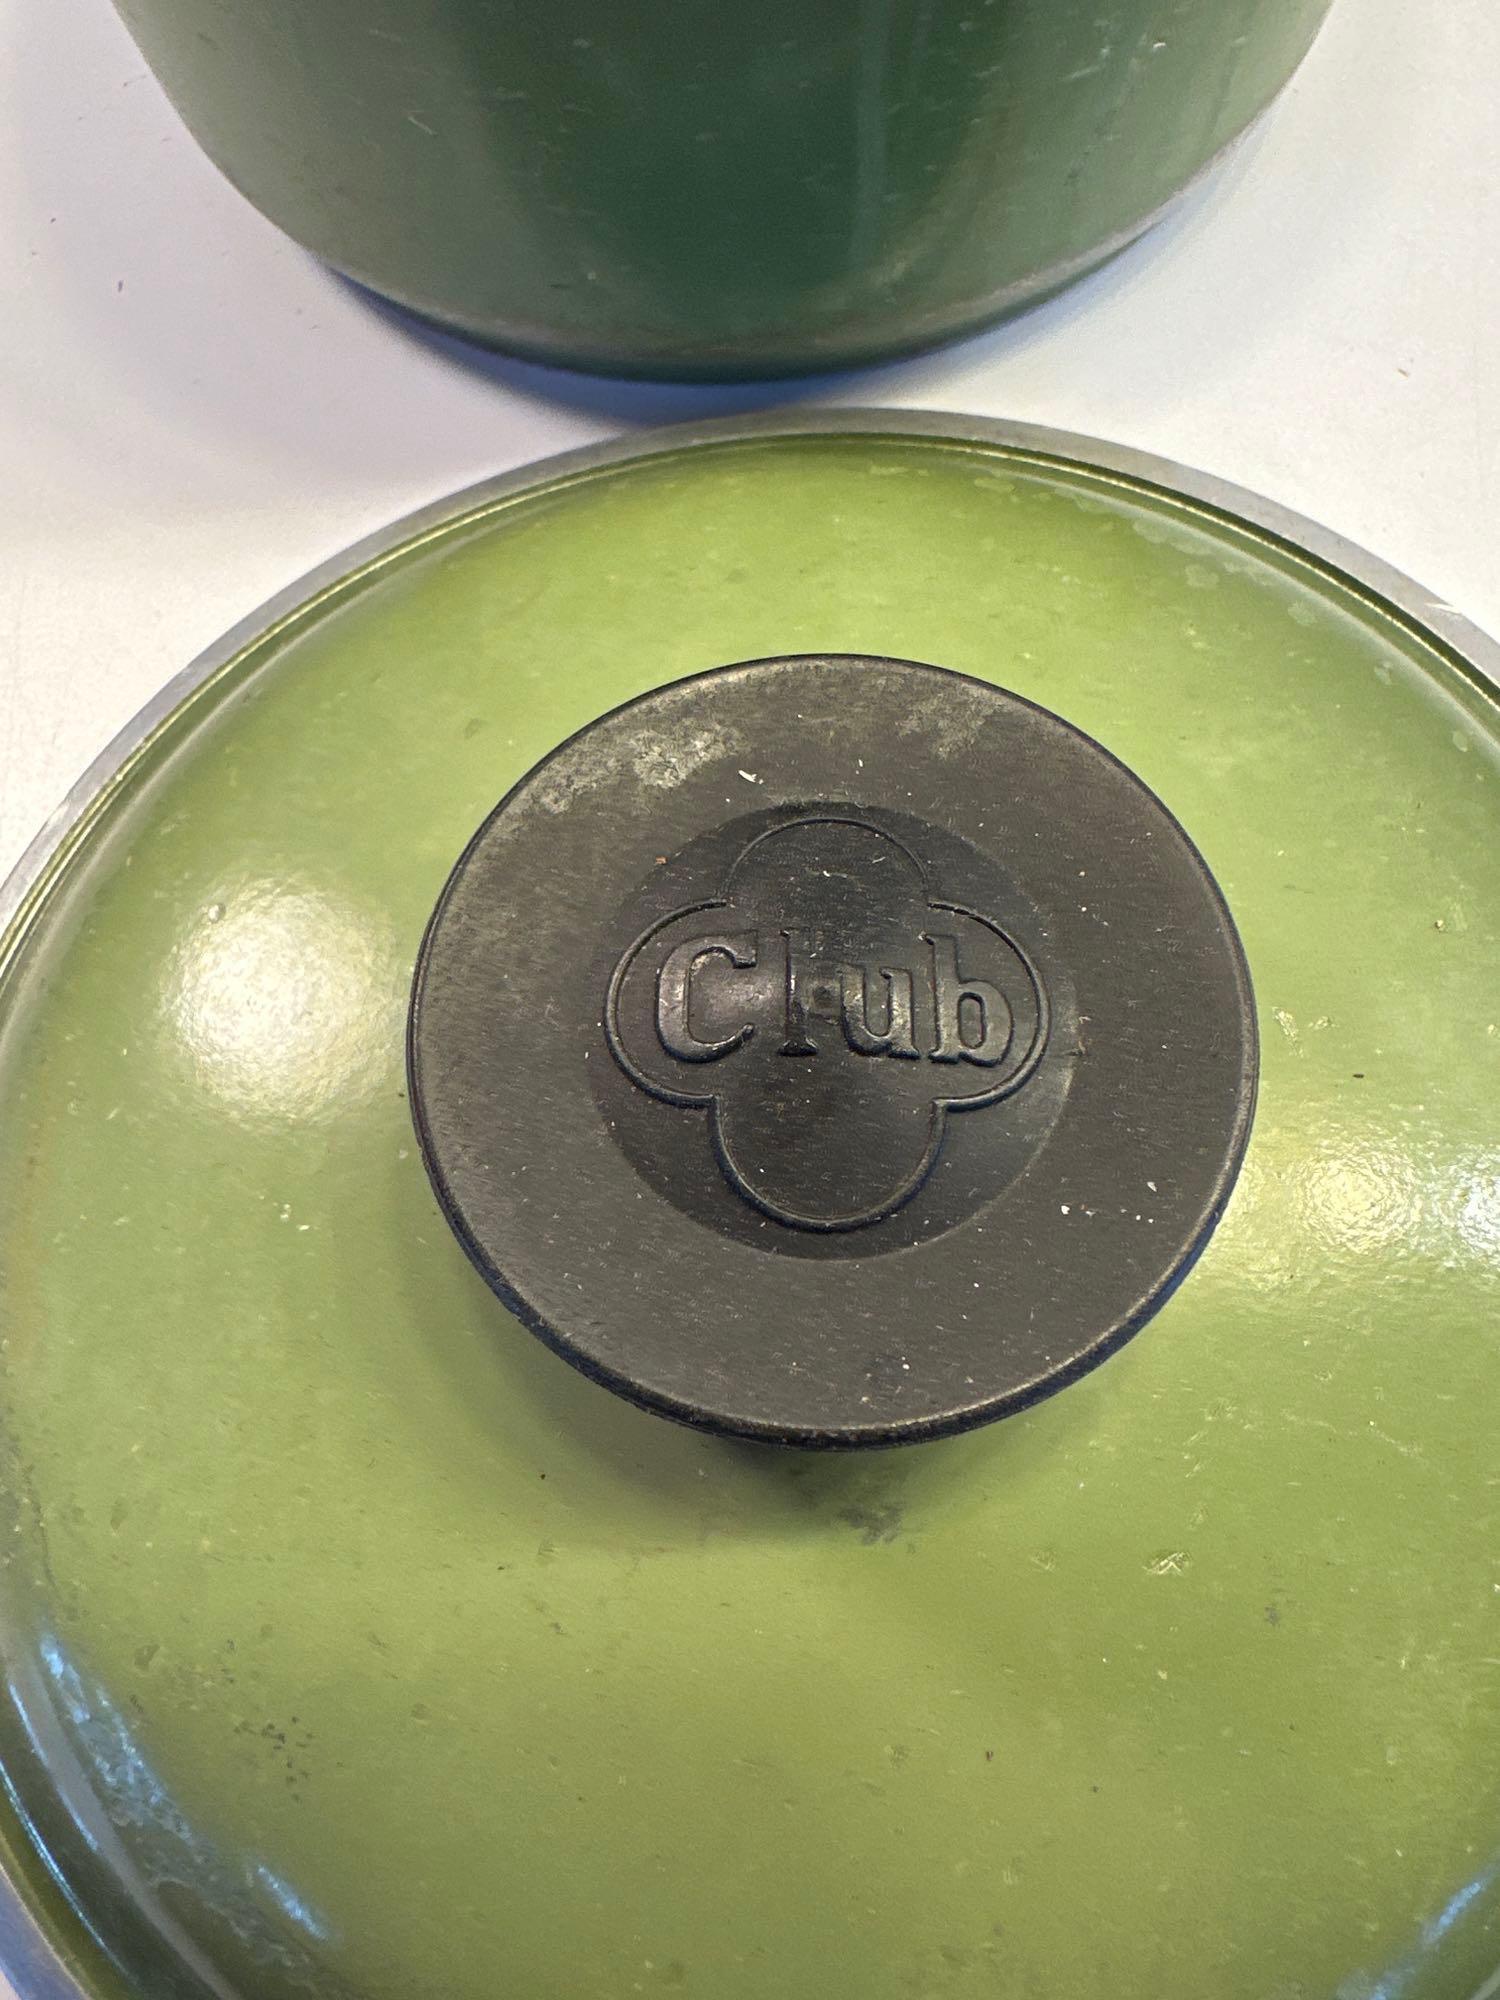 Club Green Cooking Pot and Lid